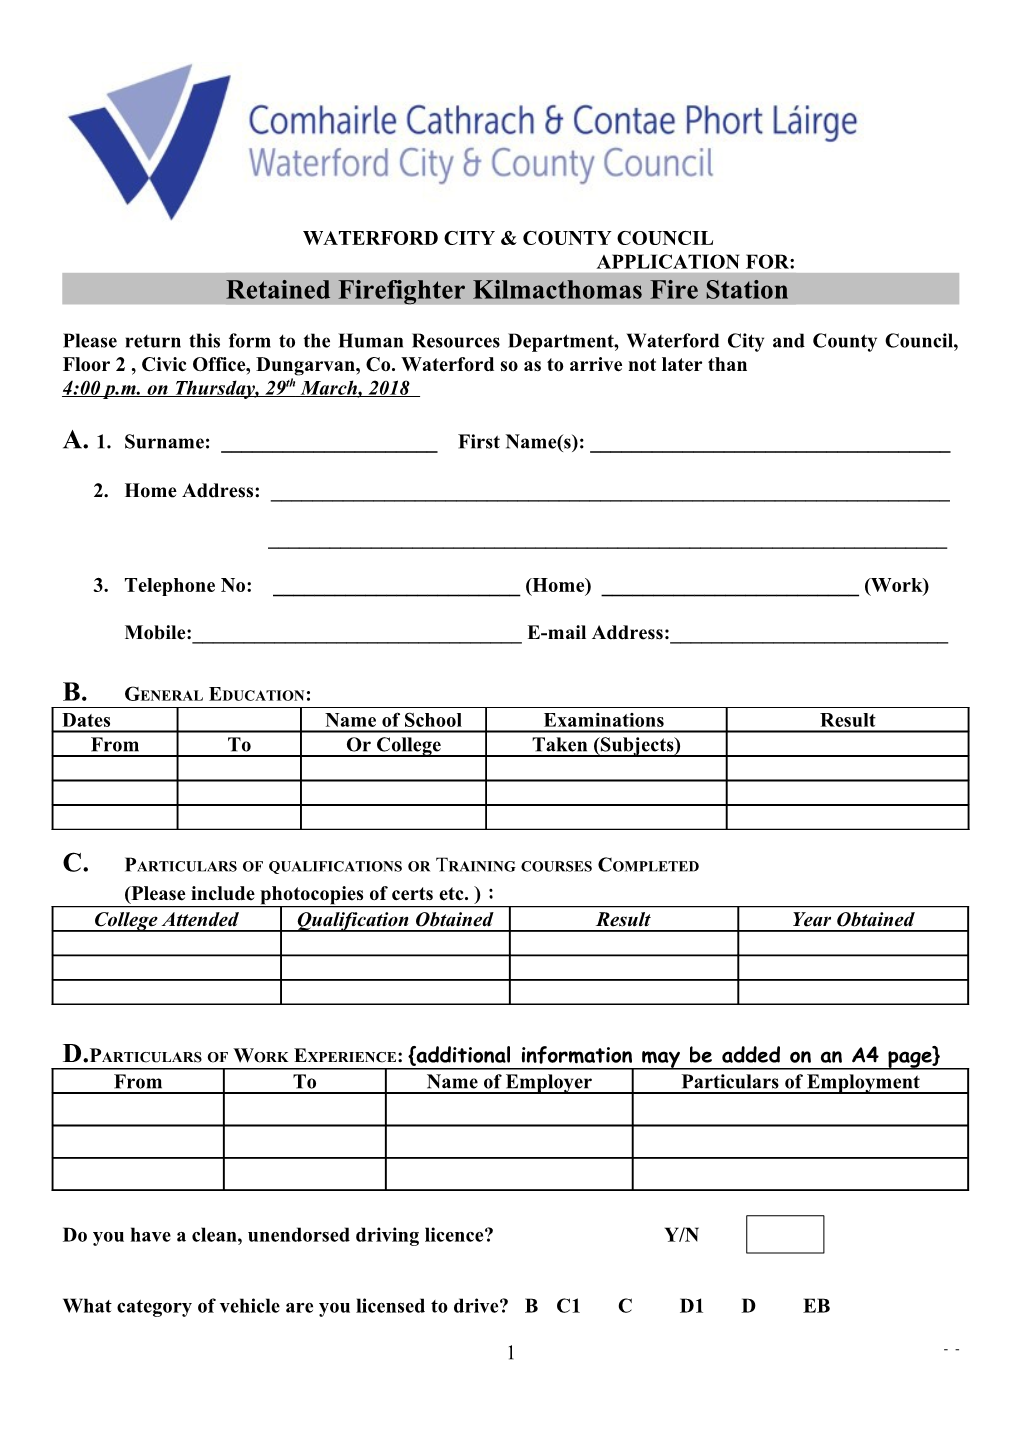 Application Form PORTLAW Retained FF